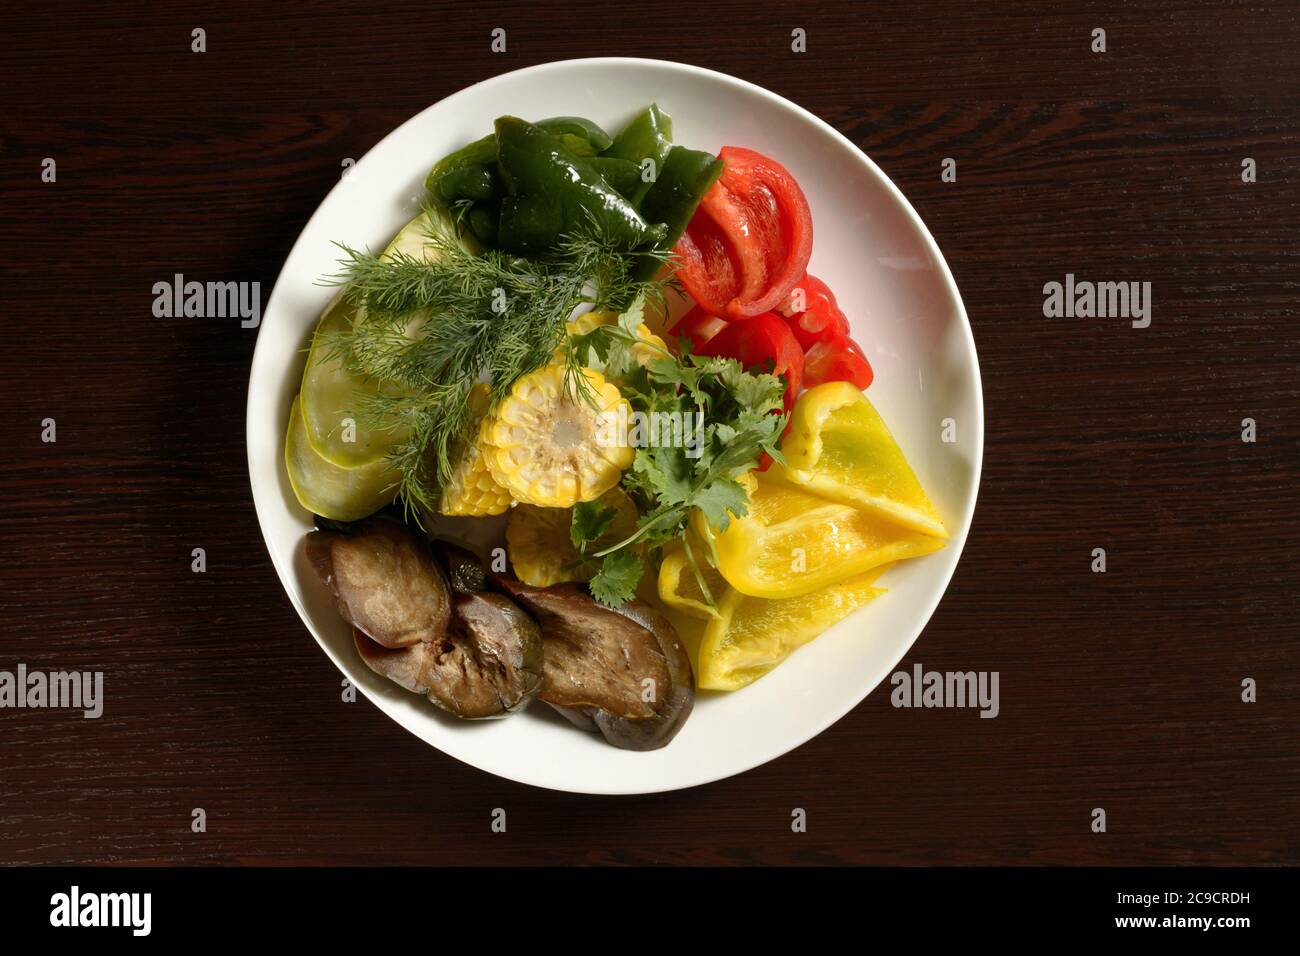 Sliced raw vegetables on a plate top view. Photos for restaurant and cafe menus Stock Photo